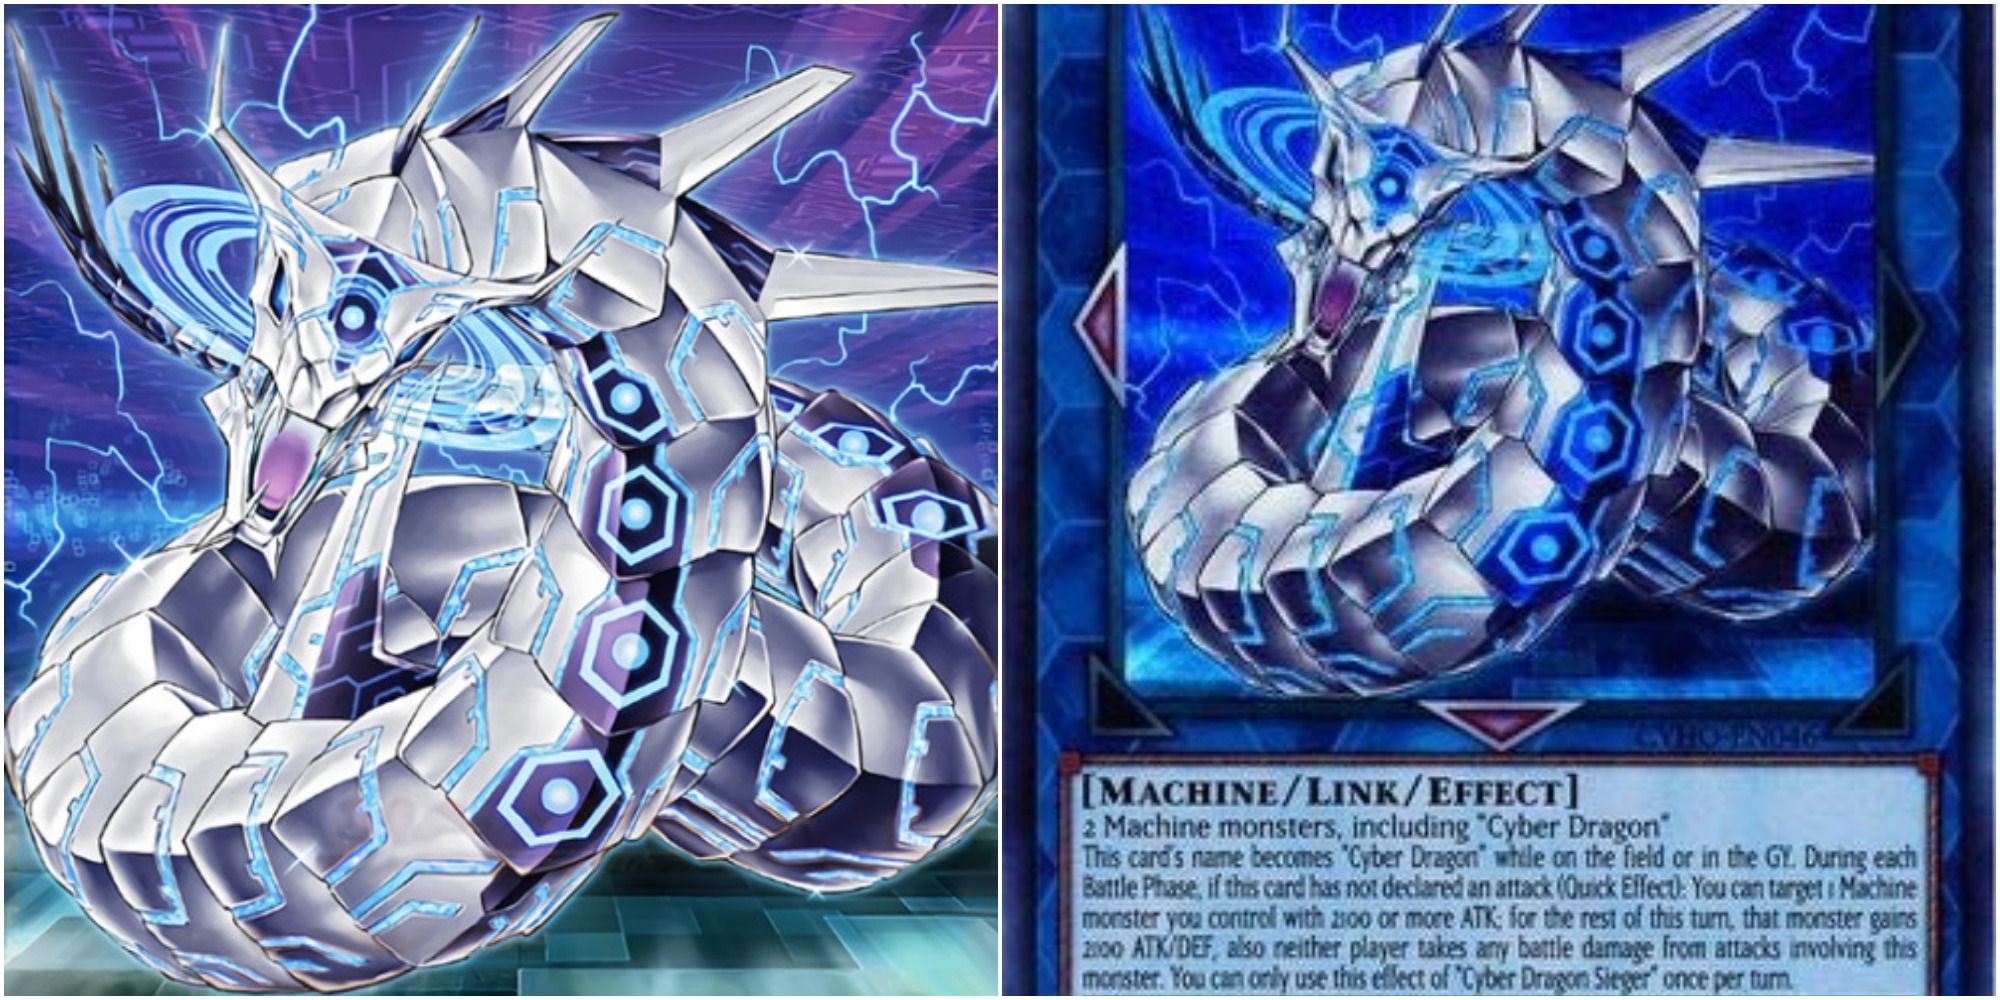 yugioh cyber dragon sieger card art and text